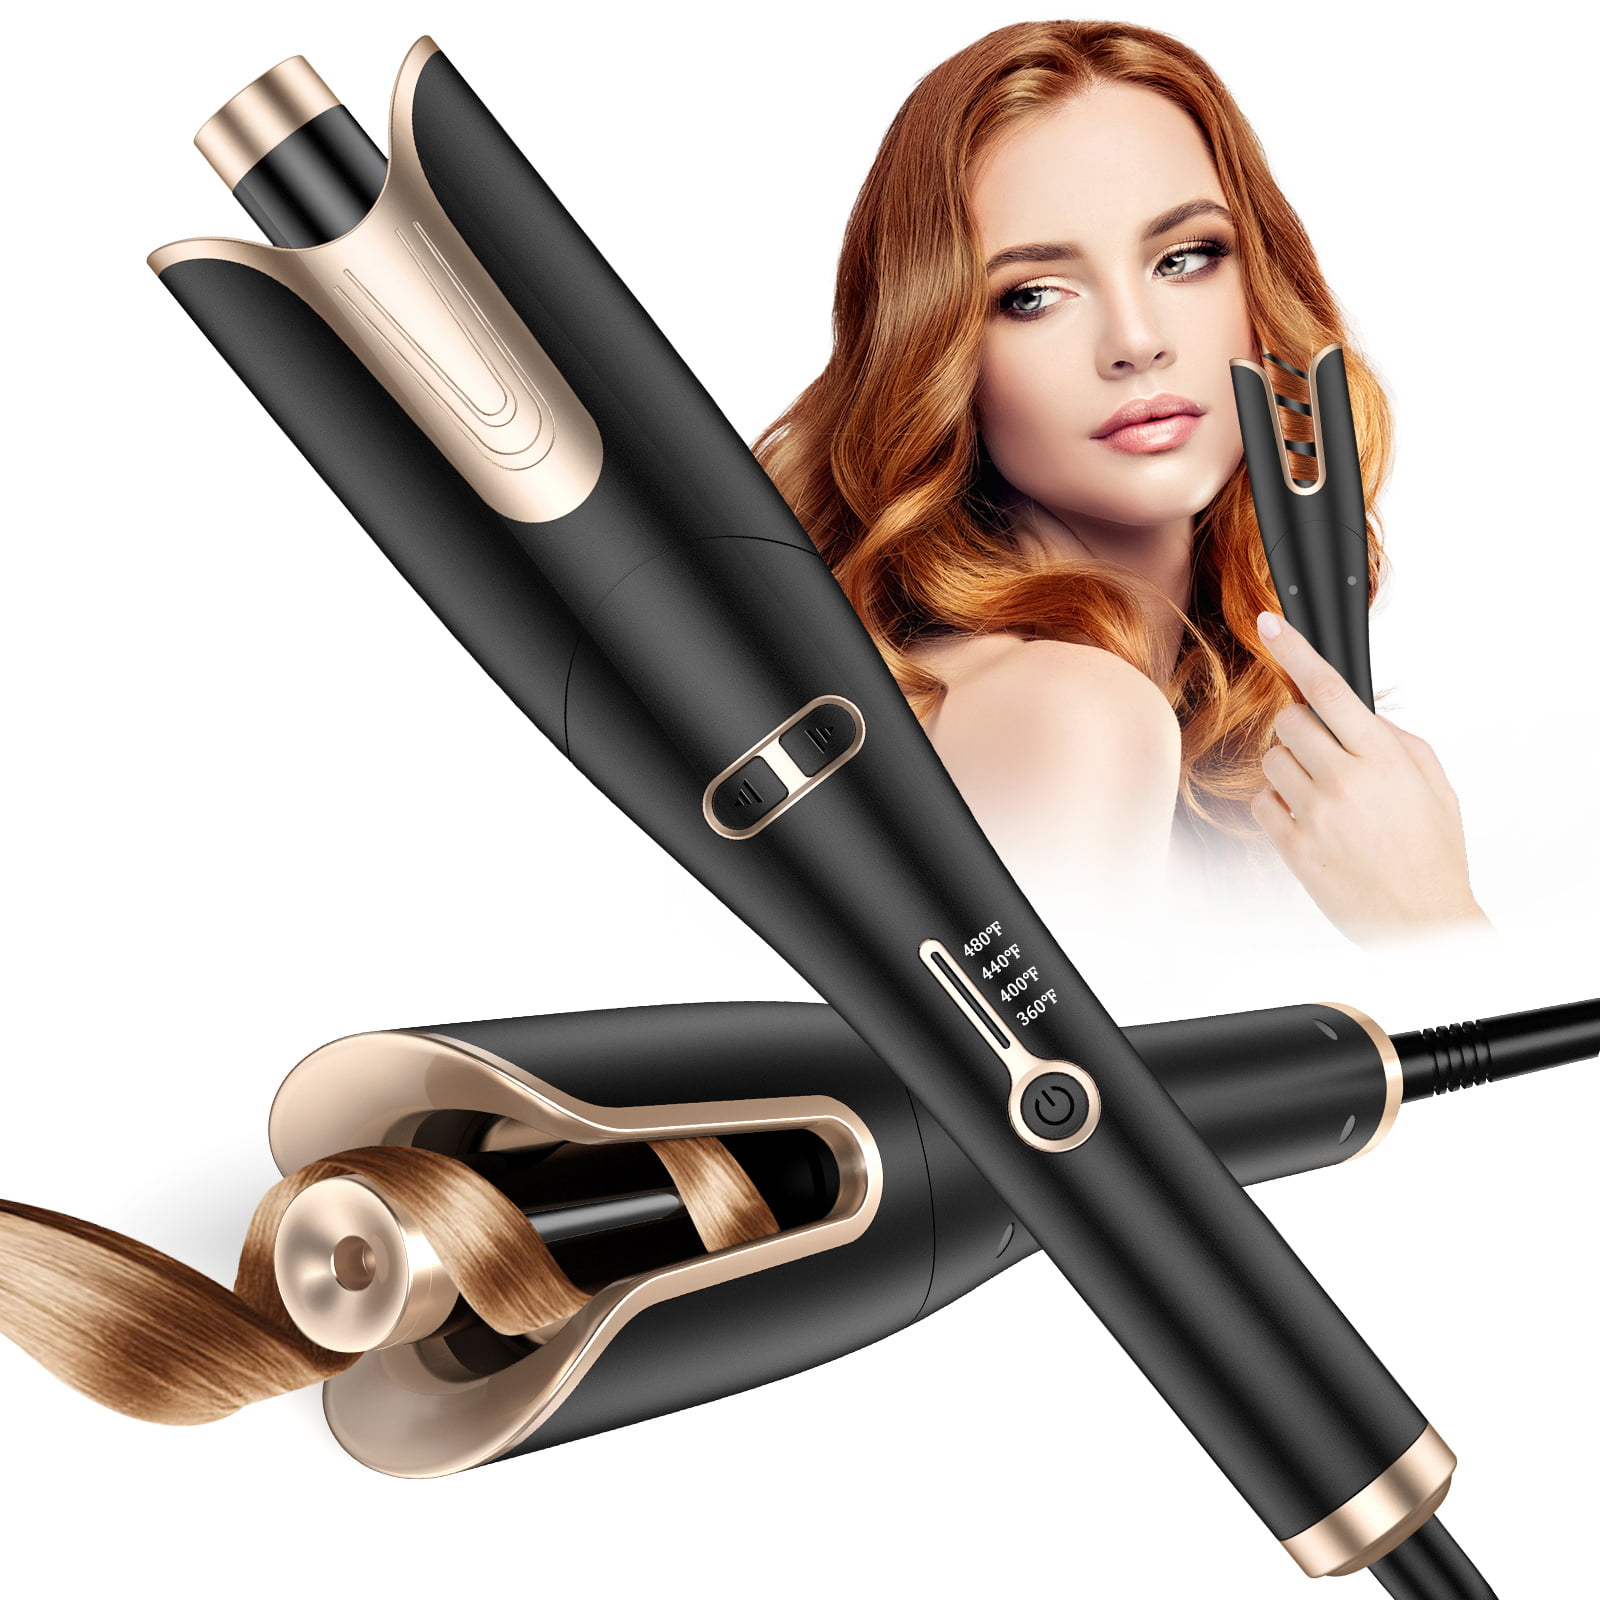 Febfoxs Curling Irons, Curling Iron Professional with 2